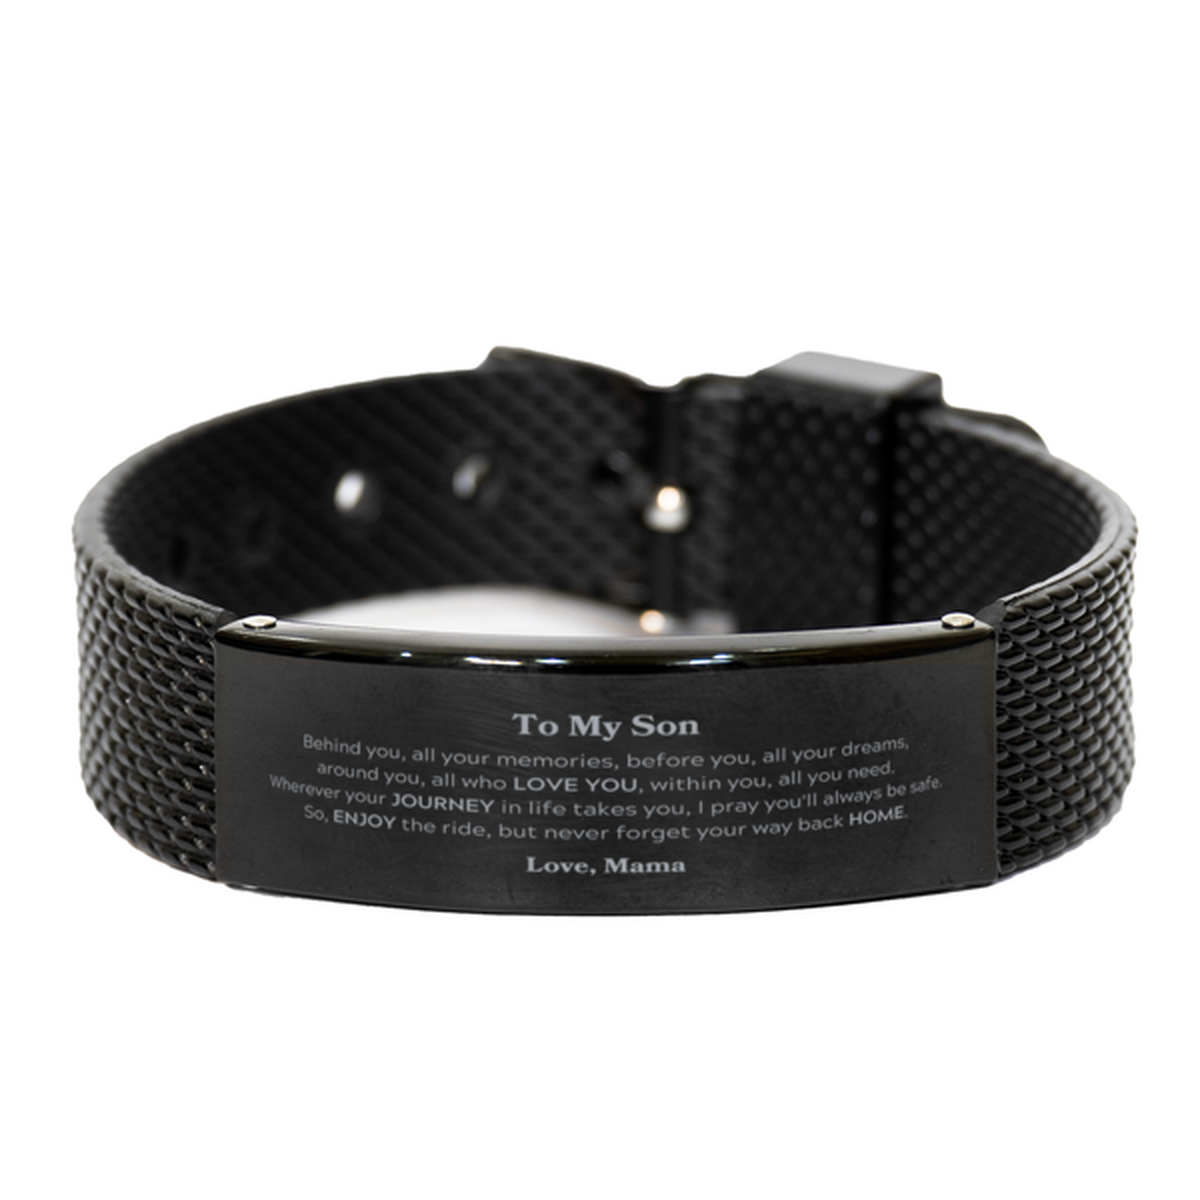 To My Son Graduation Gifts from Mama, Son Black Shark Mesh Bracelet Christmas Birthday Gifts for Son Behind you, all your memories, before you, all your dreams. Love, Mama